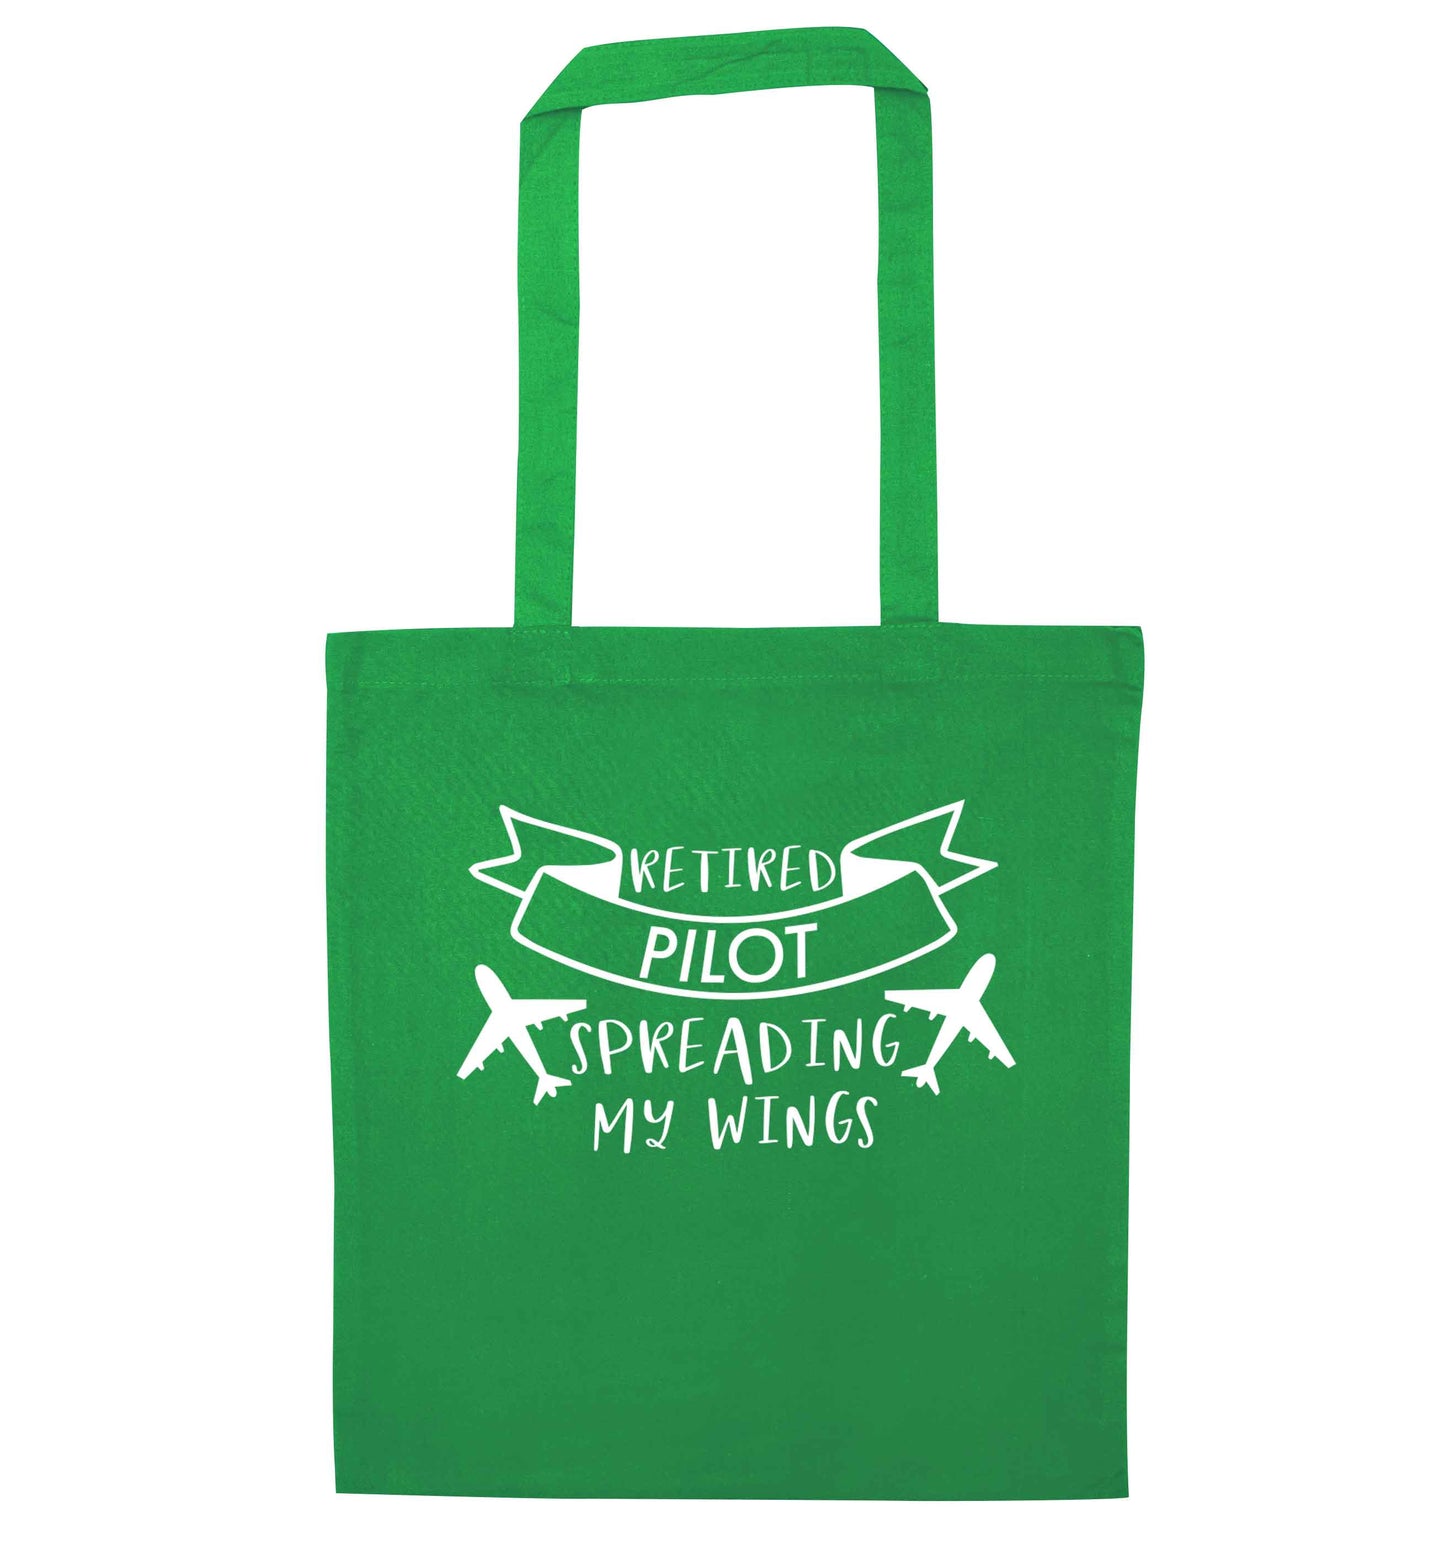 Retired pilot spreading my wings green tote bag